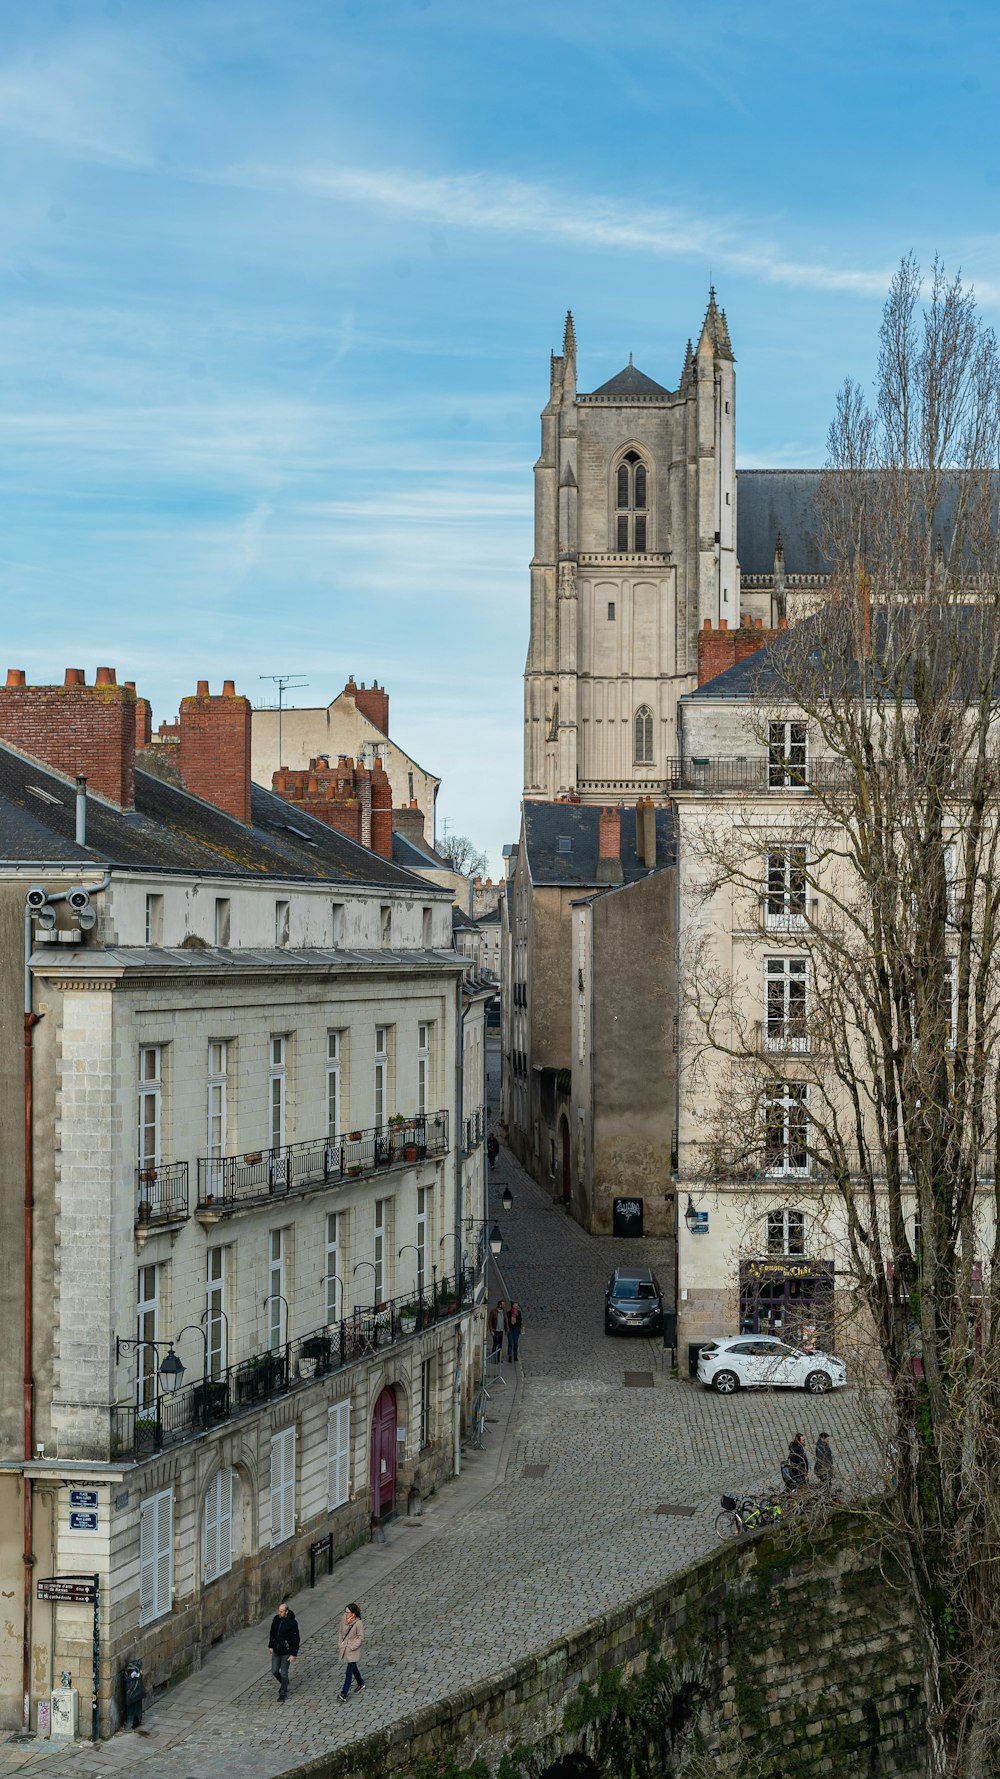 a view of a city street with a church in the background